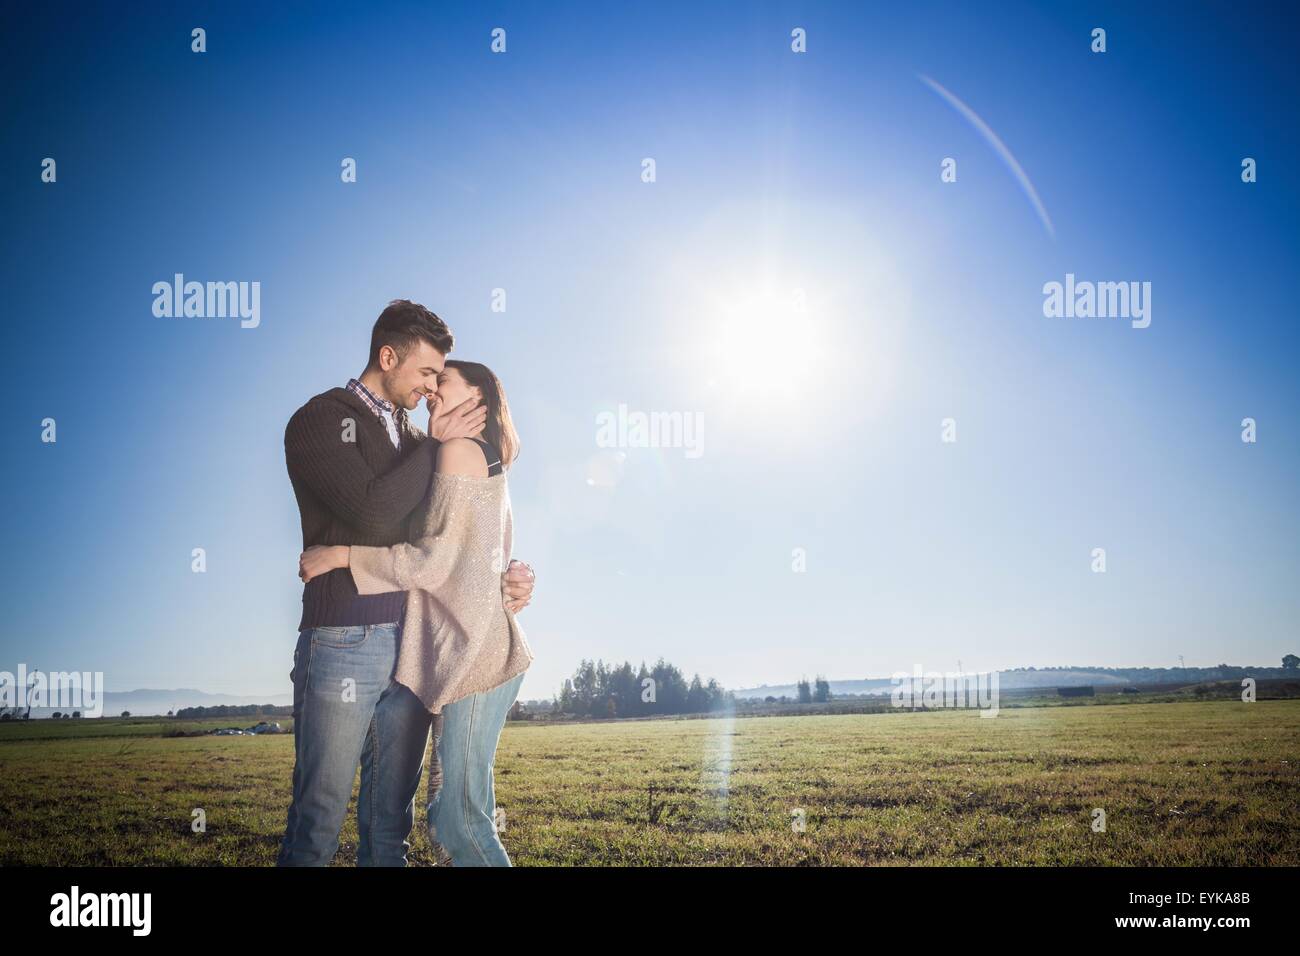 Jeune couple kissing in field Banque D'Images